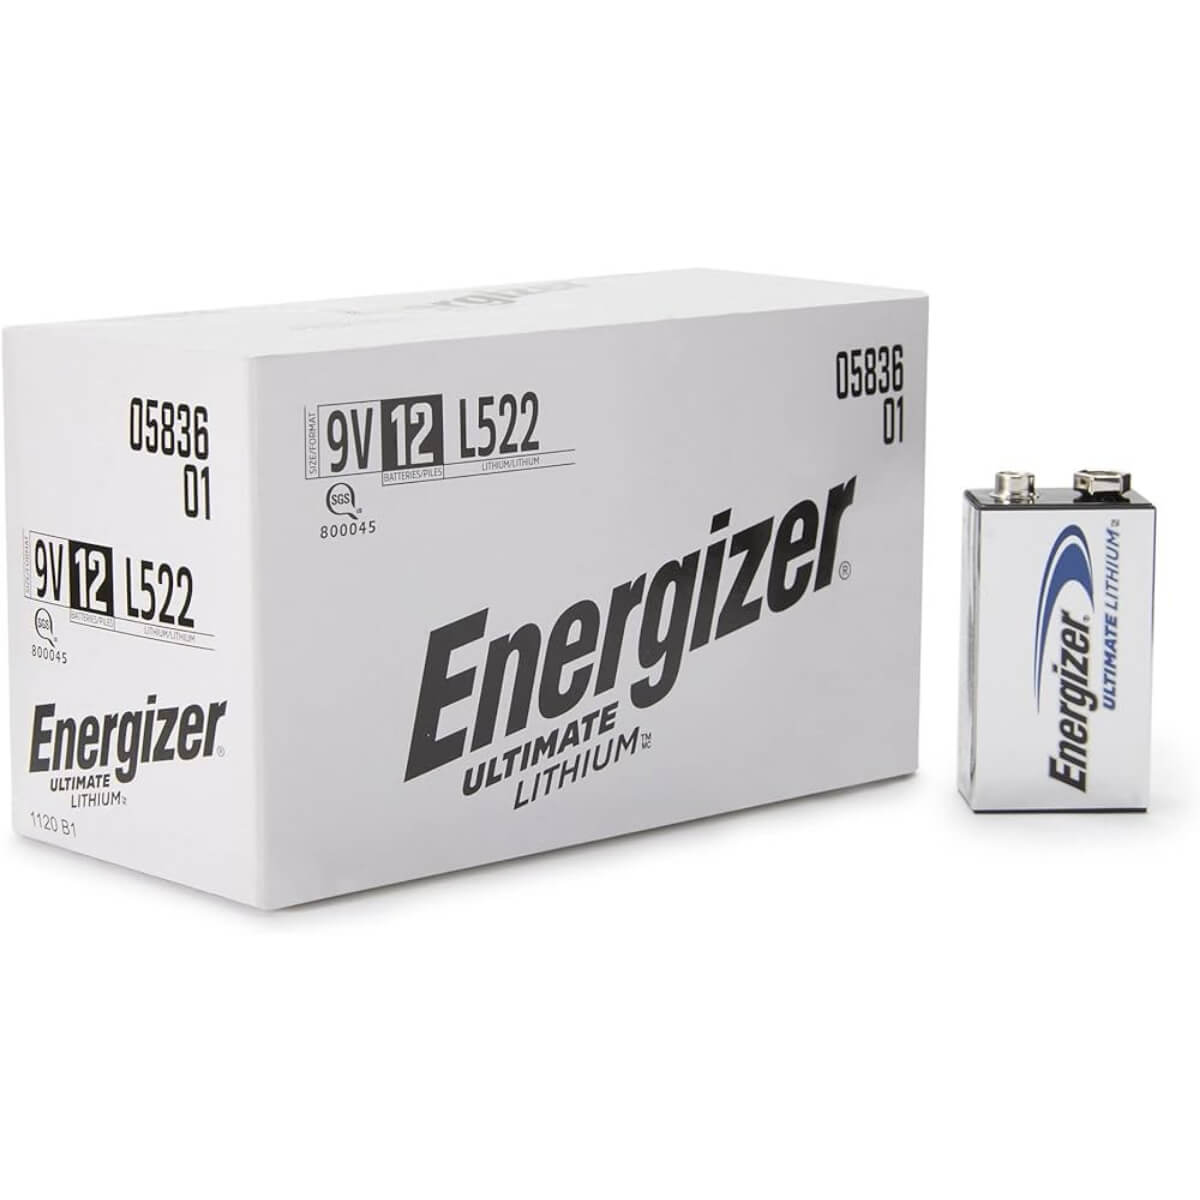 Energizer Lithium 9v Battery - Non Rechargeable Battery By Use Energizer   